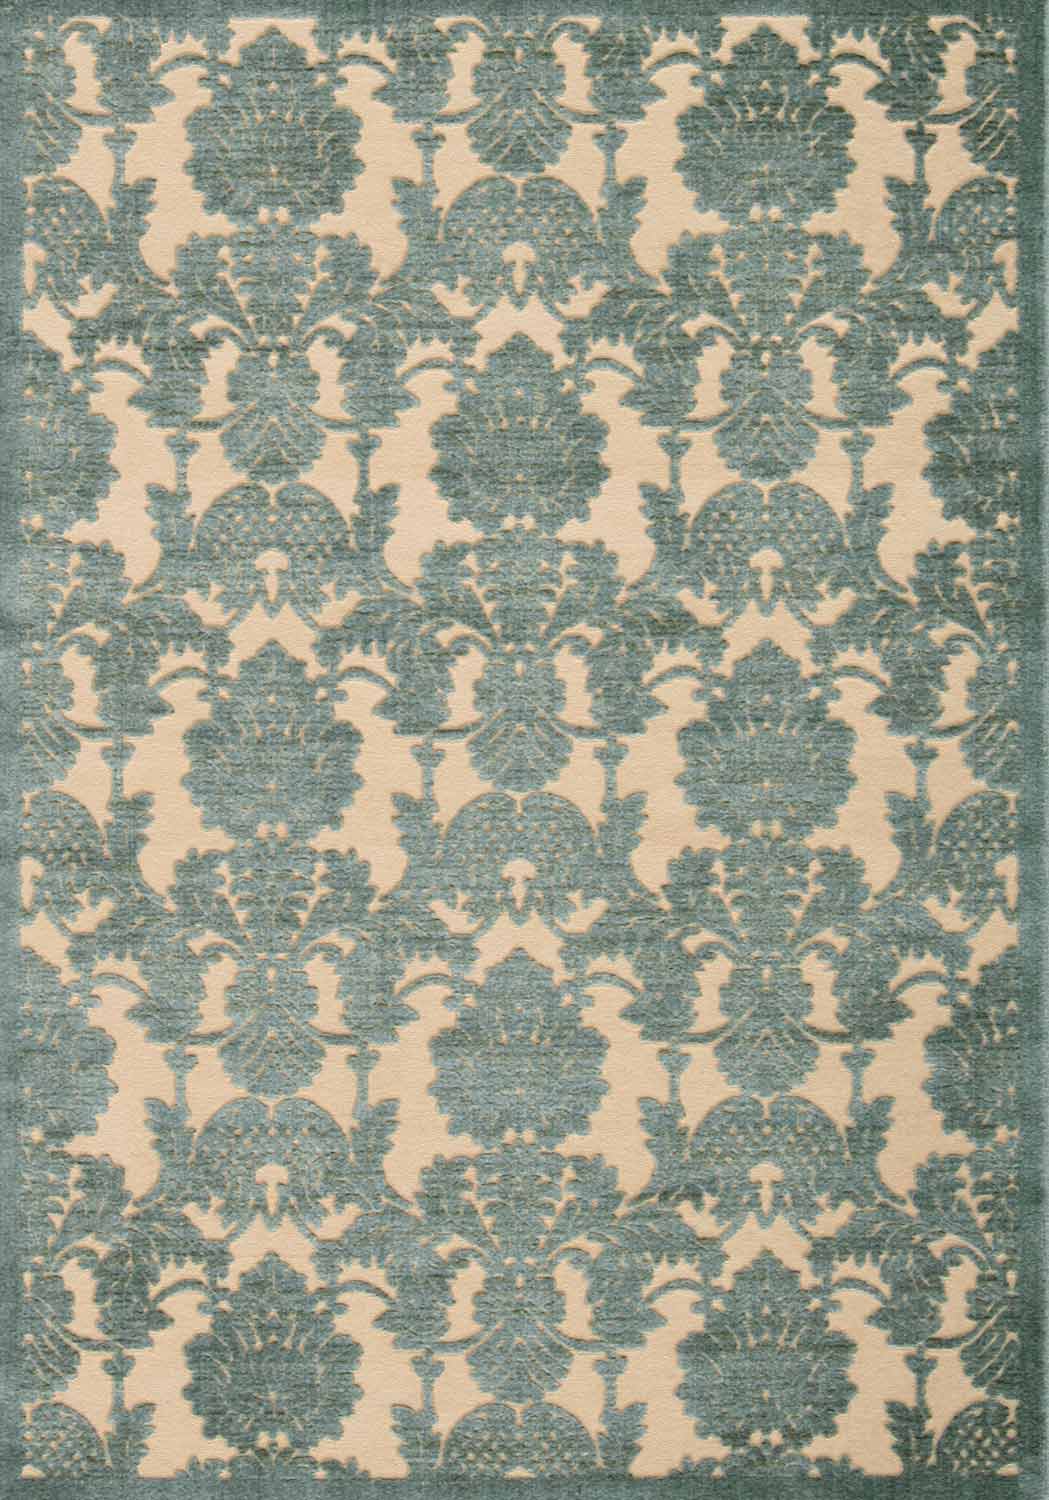 Nourison Graphic Illusions GIL03 Teal Area Rug